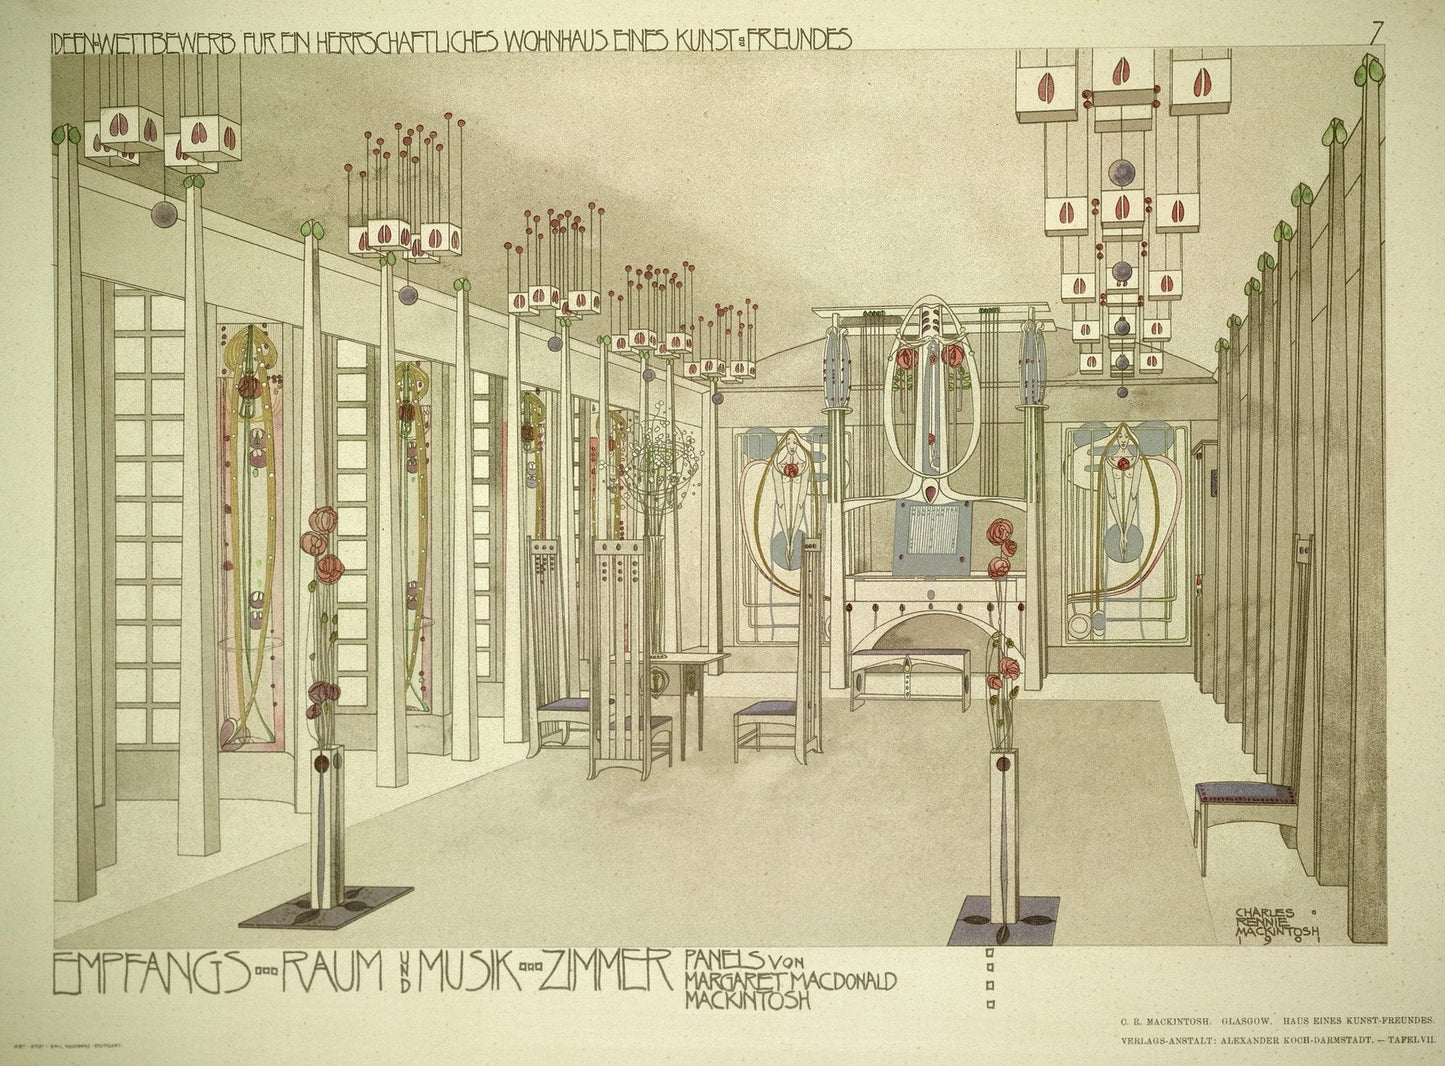 The Music Room Poster, Glasgow (1900s) | Rennie Mackintosh posters Posters, Prints, & Visual Artwork The Trumpet Shop   